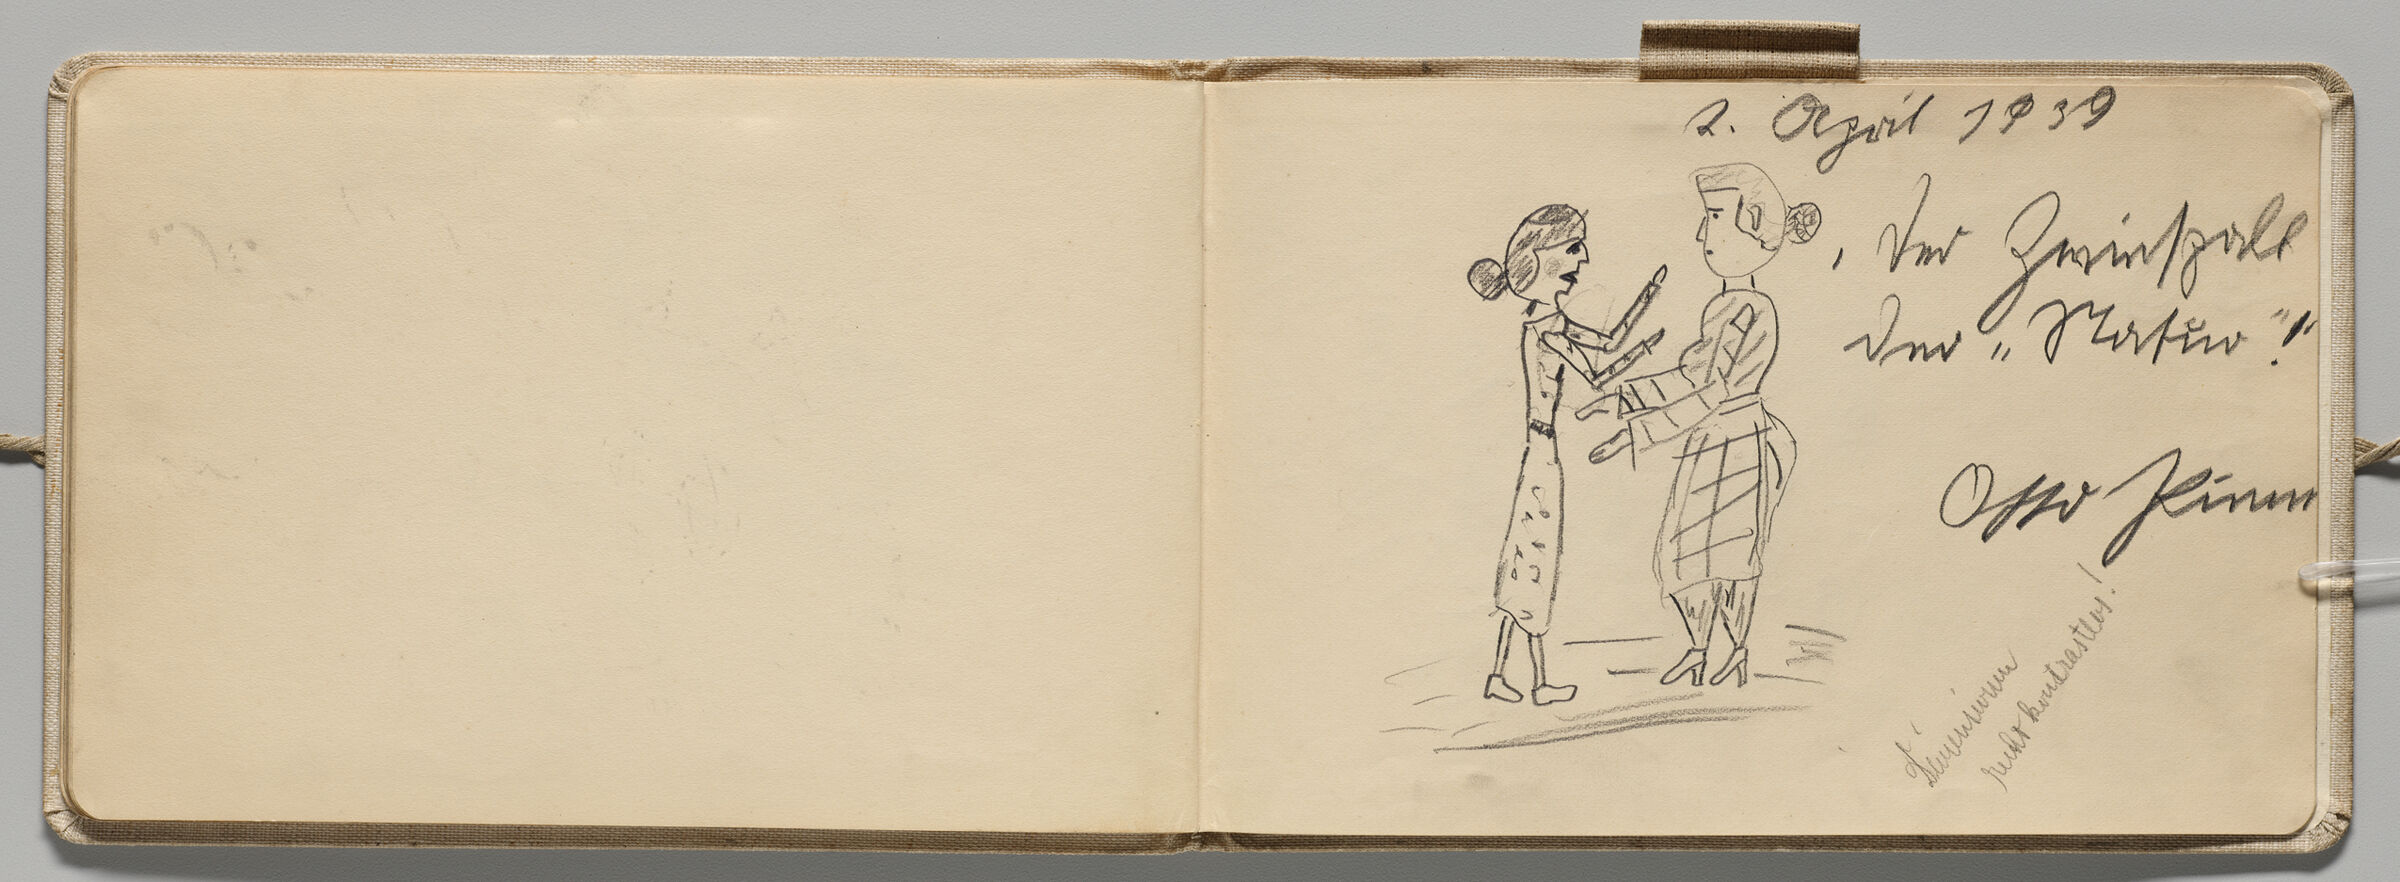 Untitled (Blank, Left Page); Untitled (Two Female Figures Playing Hand-Clapping Game, Right Page)